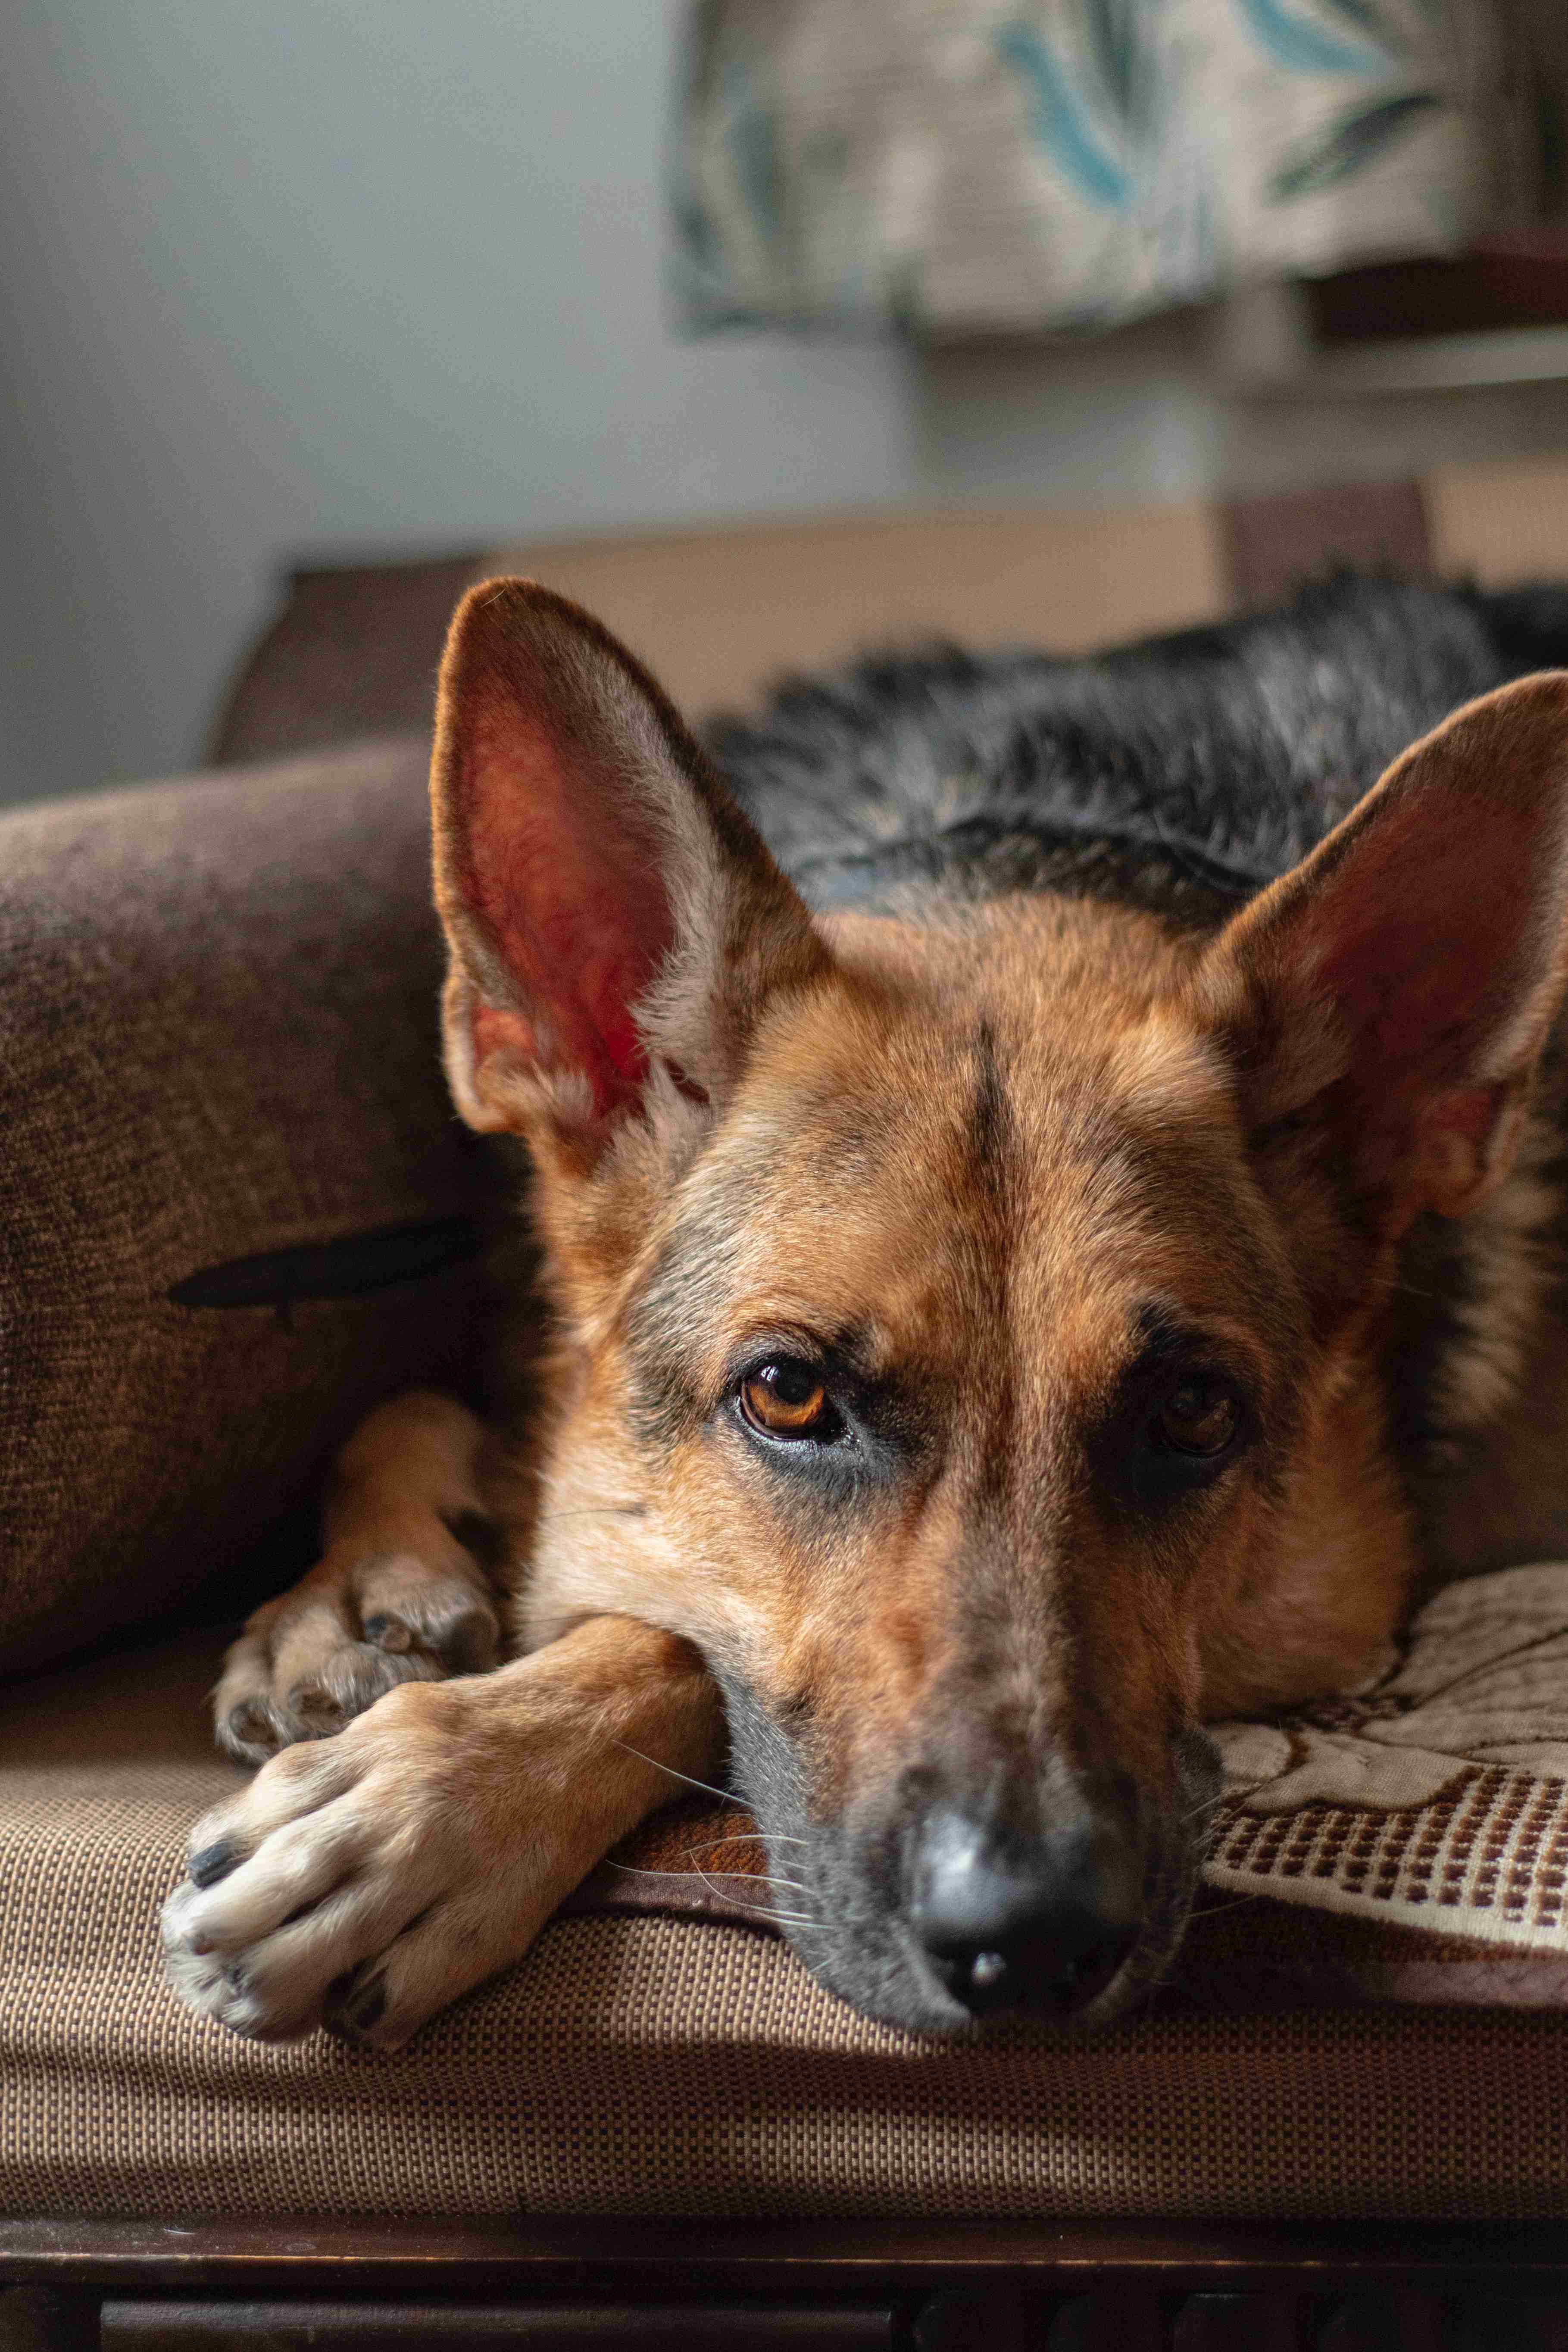 How do you ensure your German Shepherd gets enough outdoor time when living in an apartment?